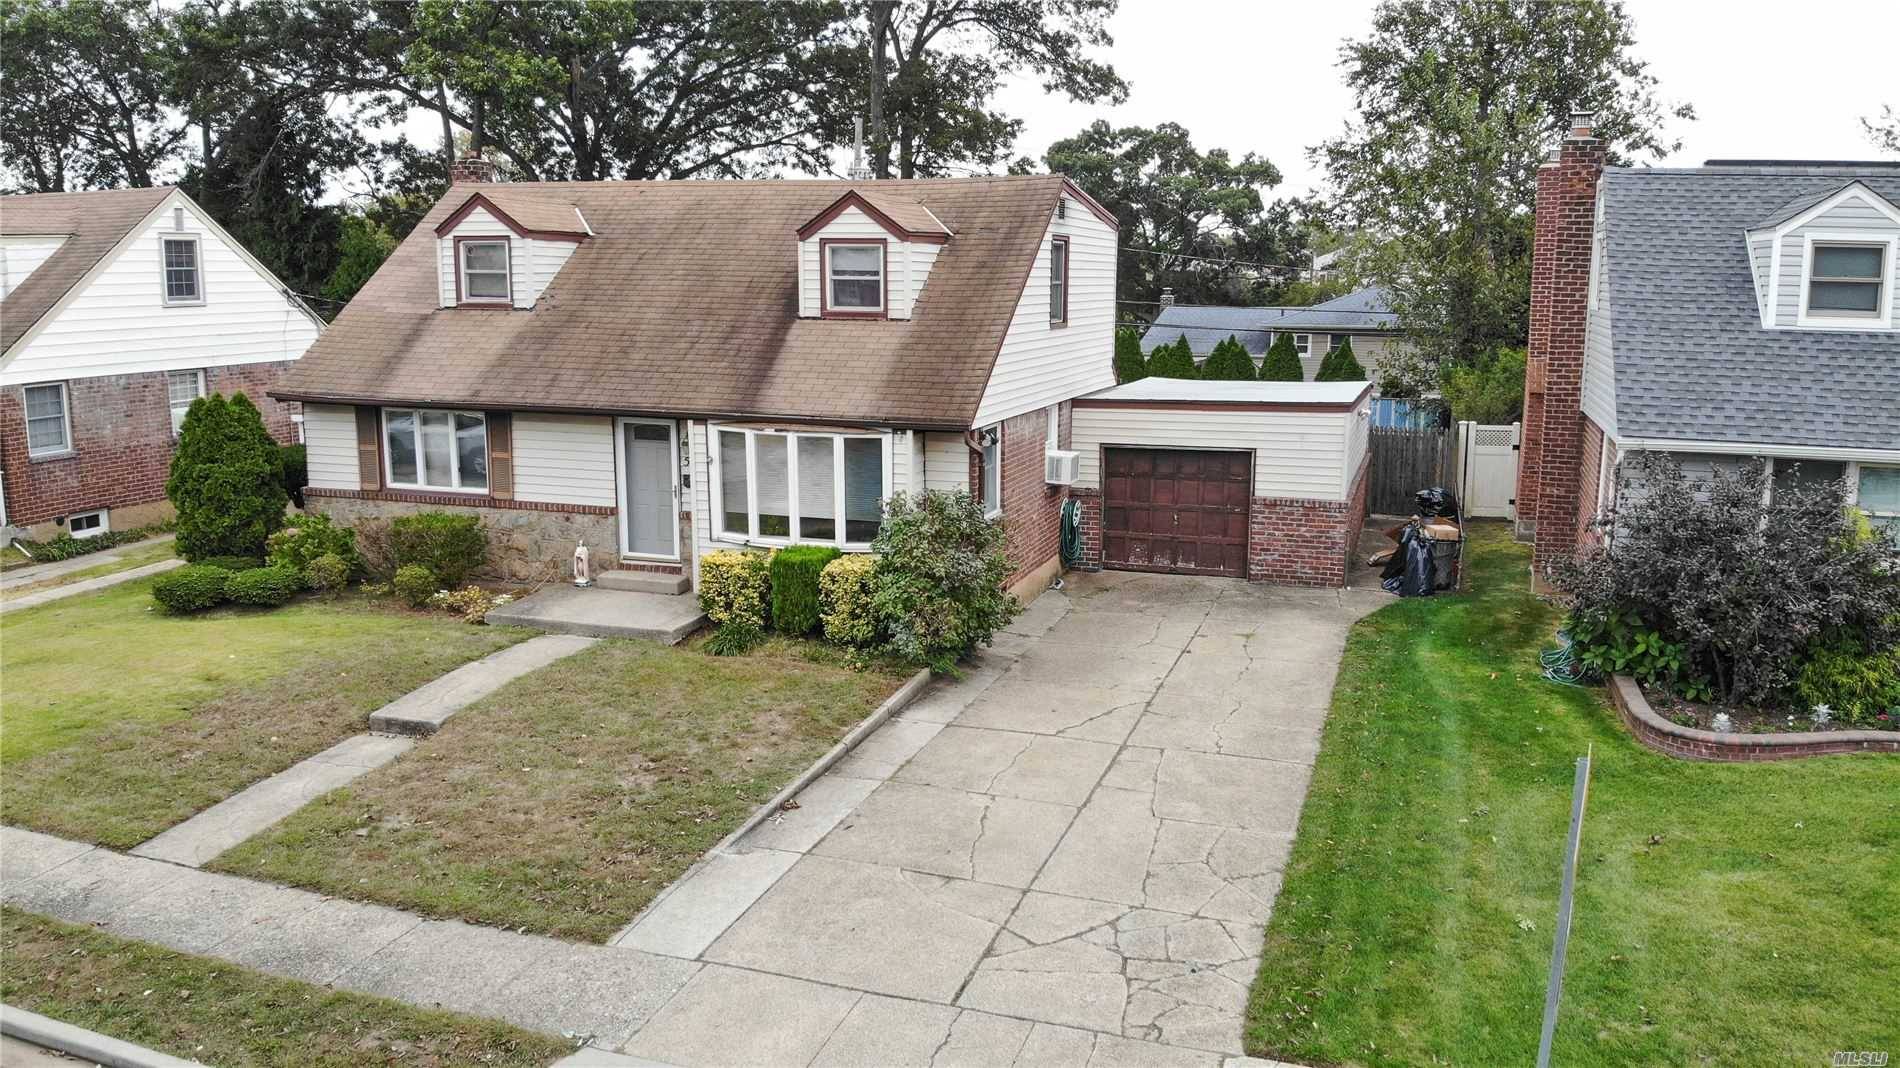 Great Opportunity To Make This One Your Own, This Wide Line Cape Is Set On A Beautiful Tree Lined Street With A Large Backyard, 200 Amp Service, and Central Vac.